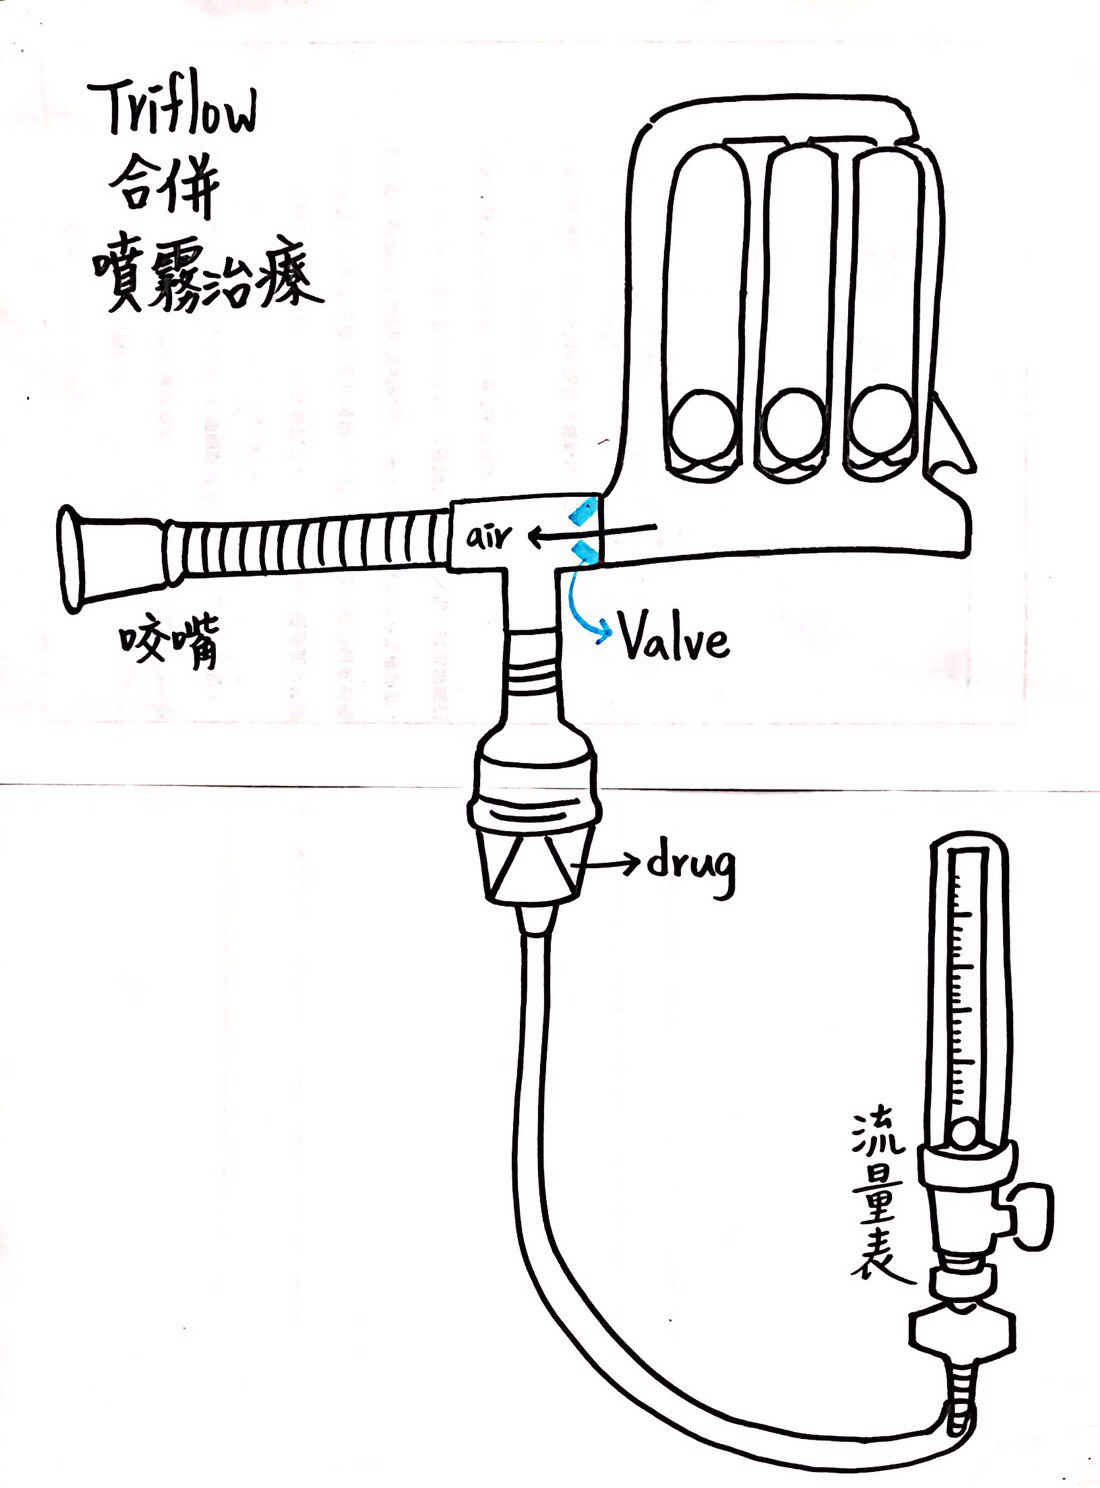 Pipeline coupling device-(Magic T, easy to suck: Two in one breathing treatment of T-tube)